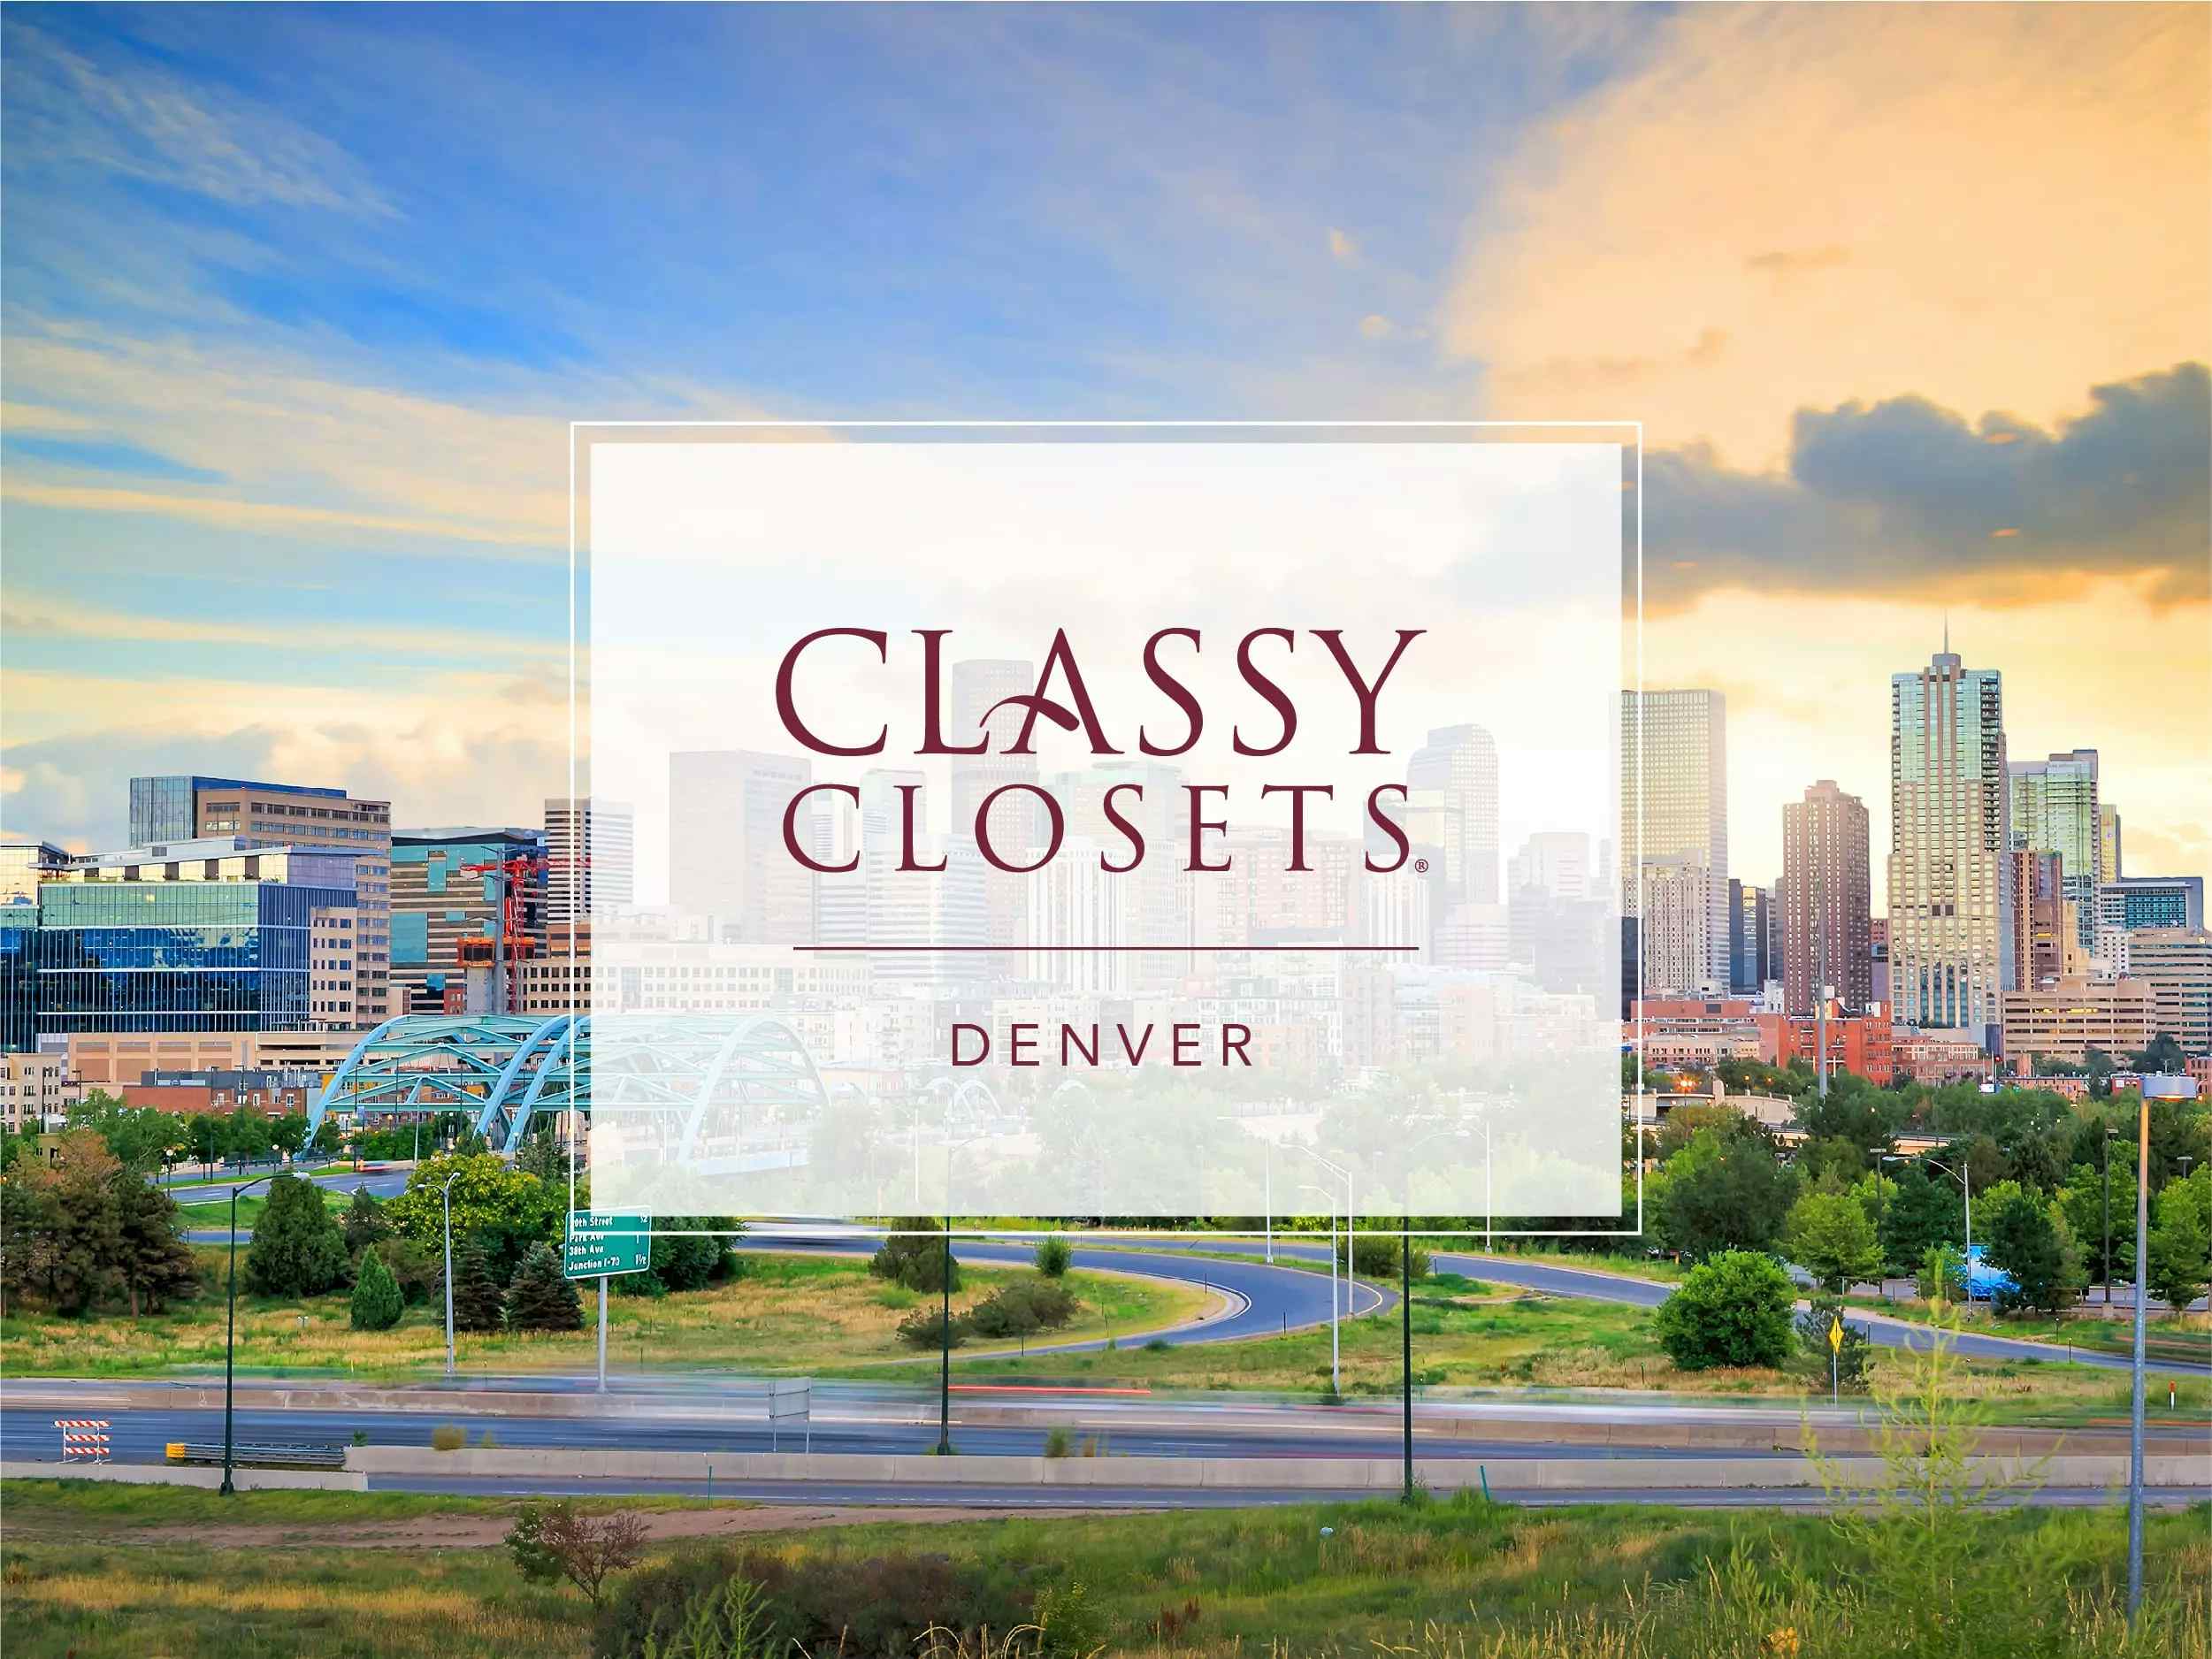 showroom on the location page-/images/locations/Denver.webp